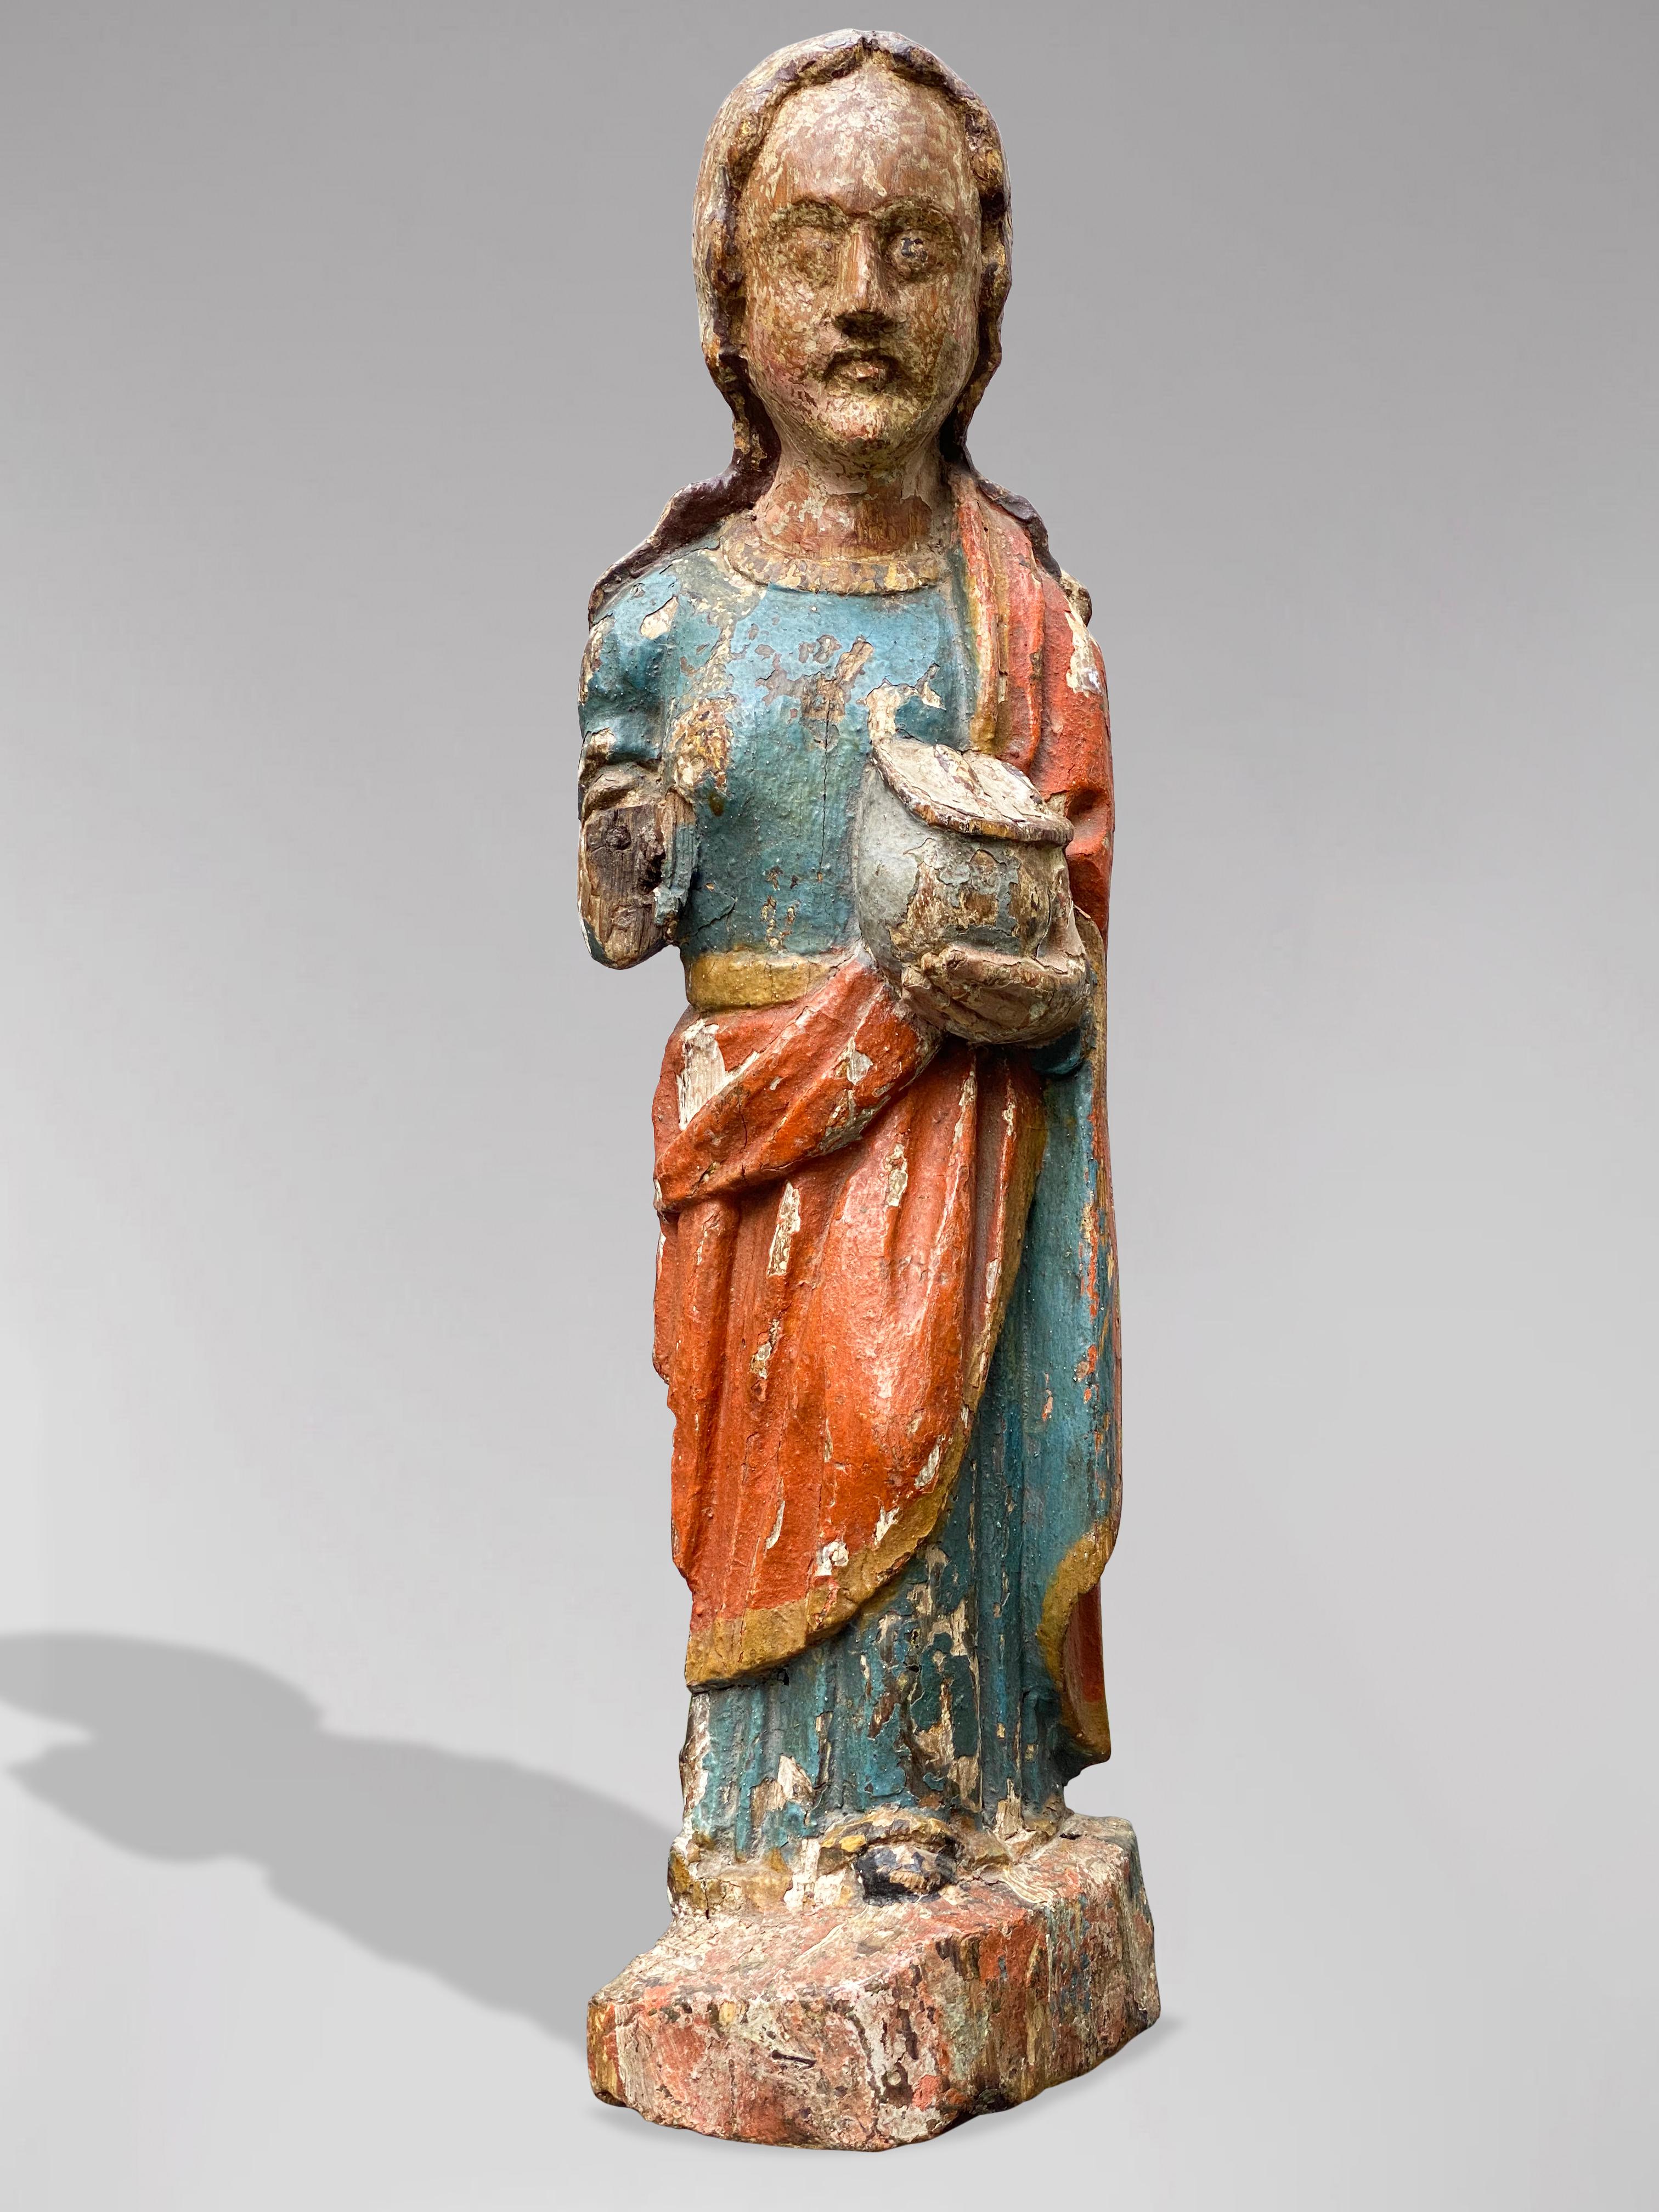 A Spanish Gothic Statue of Saint Mary Magdalene, Late 15th Century